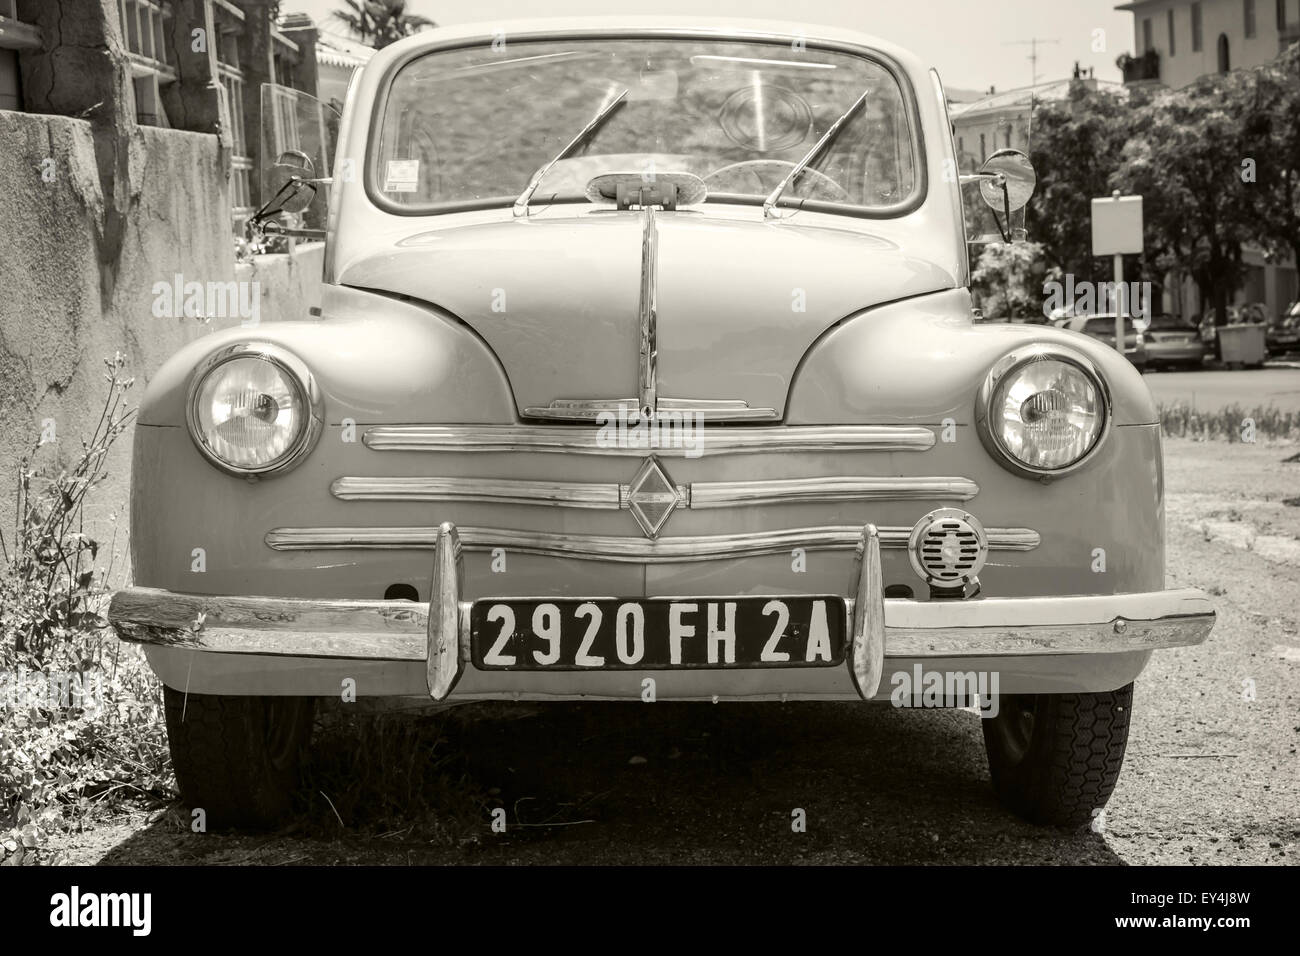 Ajaccio, France - July 6, 2015: Renault 4CV old-timer economy car stands parked on a roadside in French town, front view Stock Photo